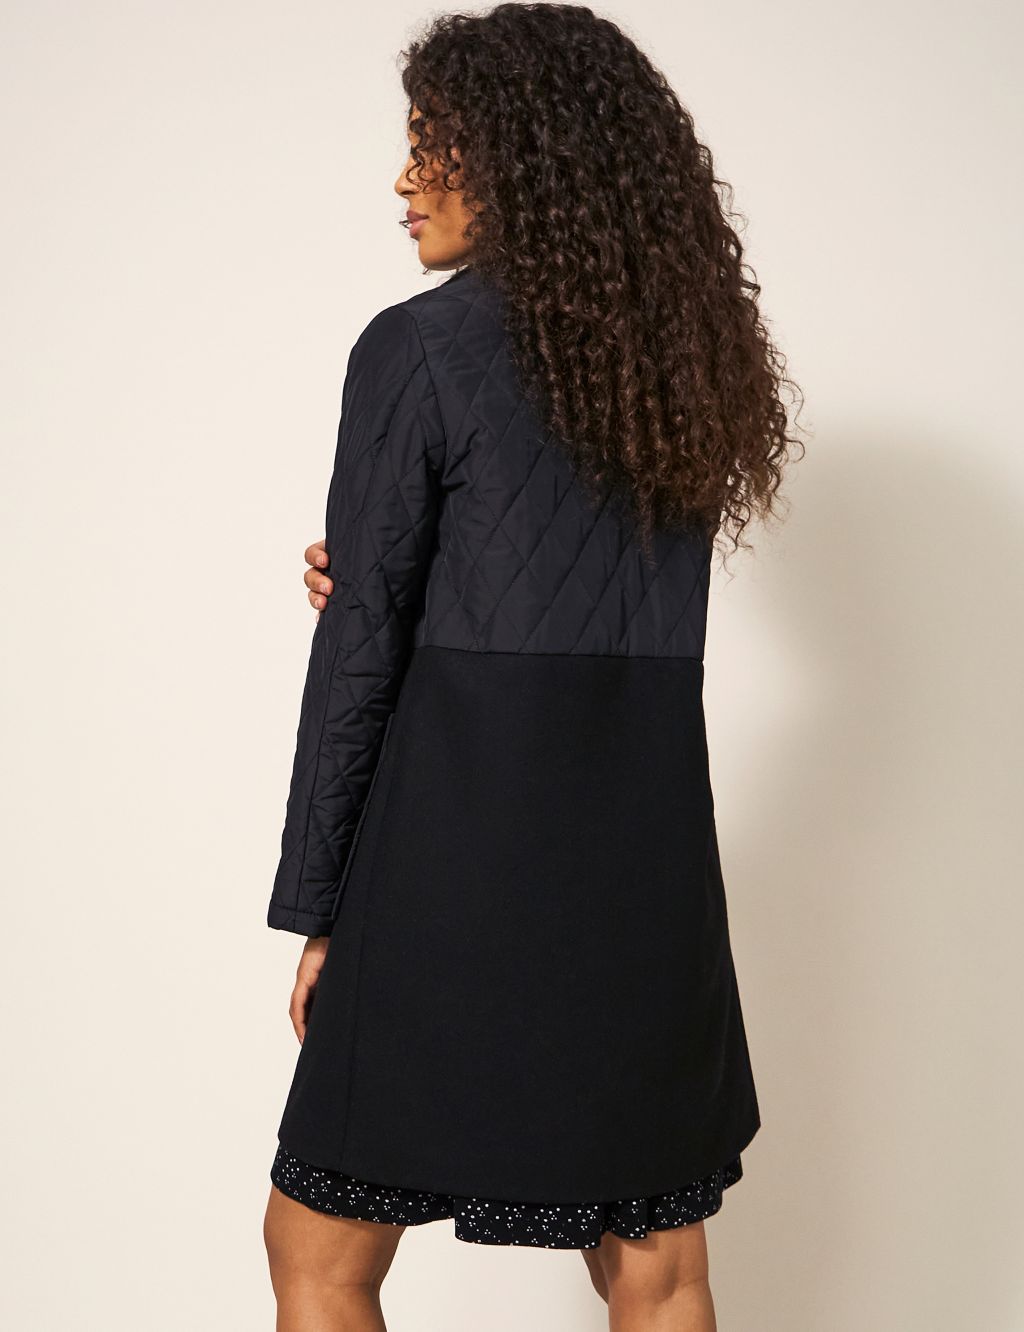 Textured Pea Coat with Wool image 5